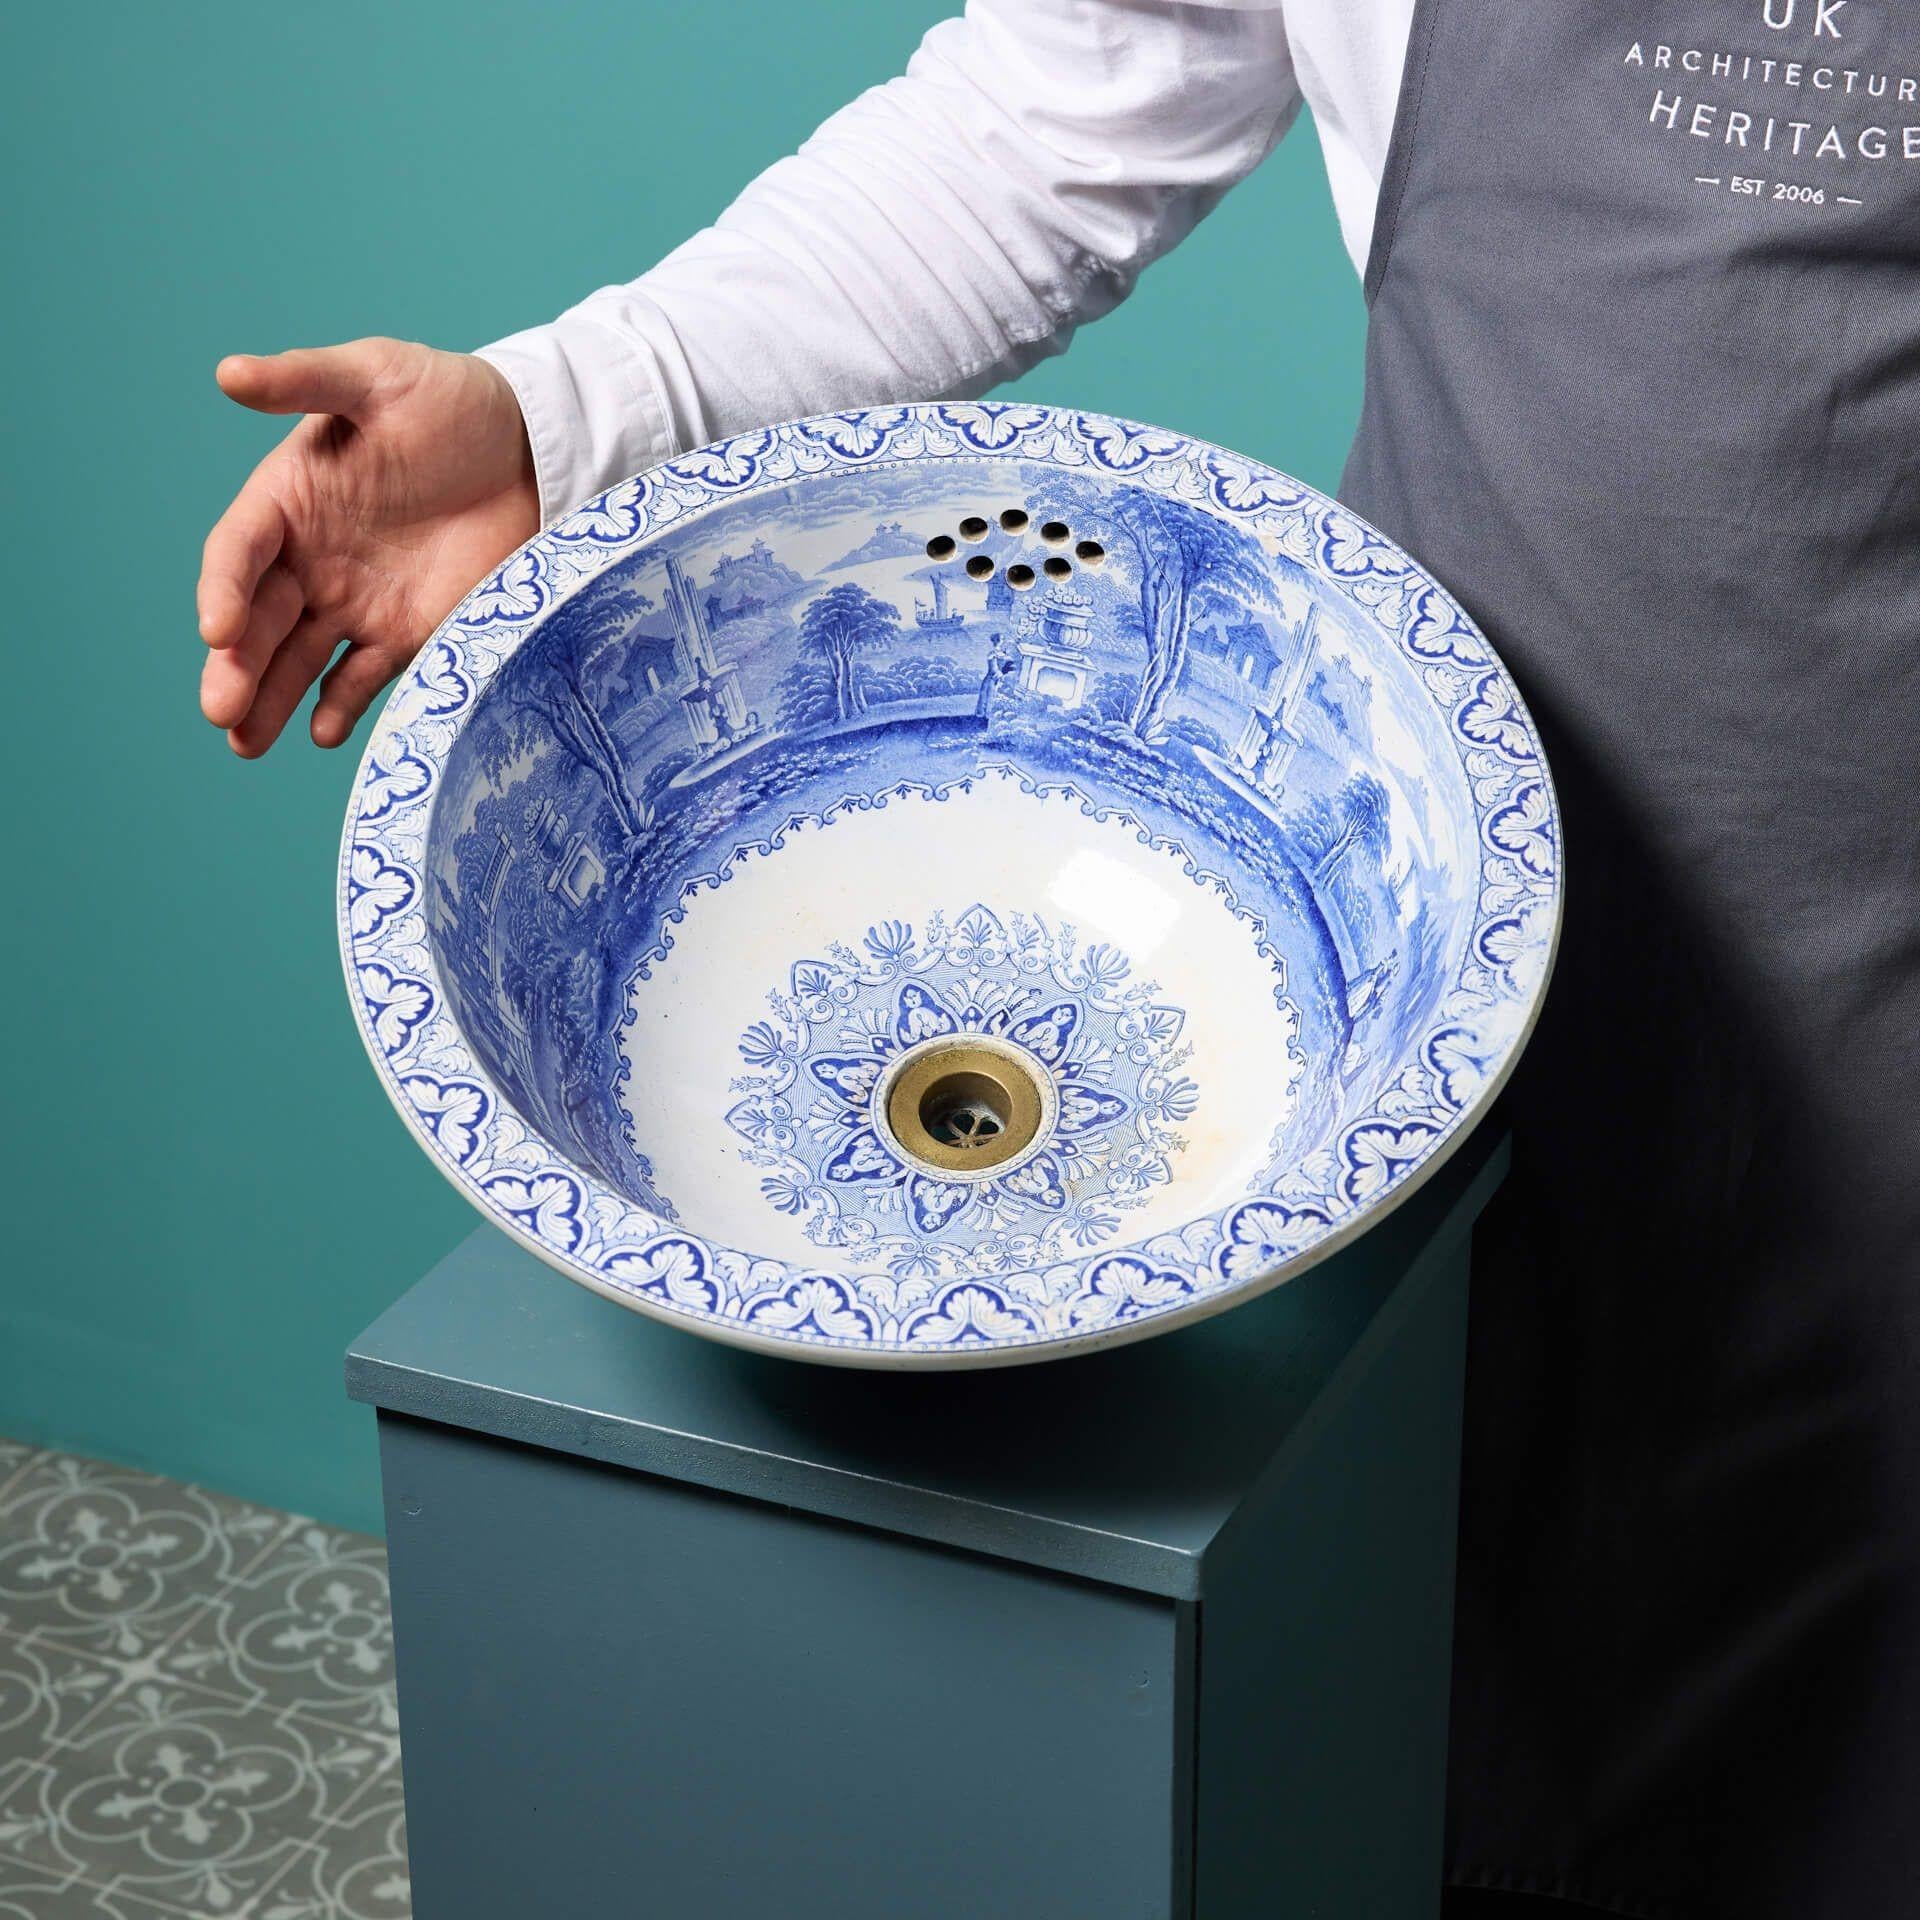 An elegant antique blue and white transfer print bowl sink dating from circa 1880. It is a beautiful basin for a vintage ensuite or period bathroom, suitable for positioning sunk into a counter or mounted on a surface.

Over 140 years old, this sink